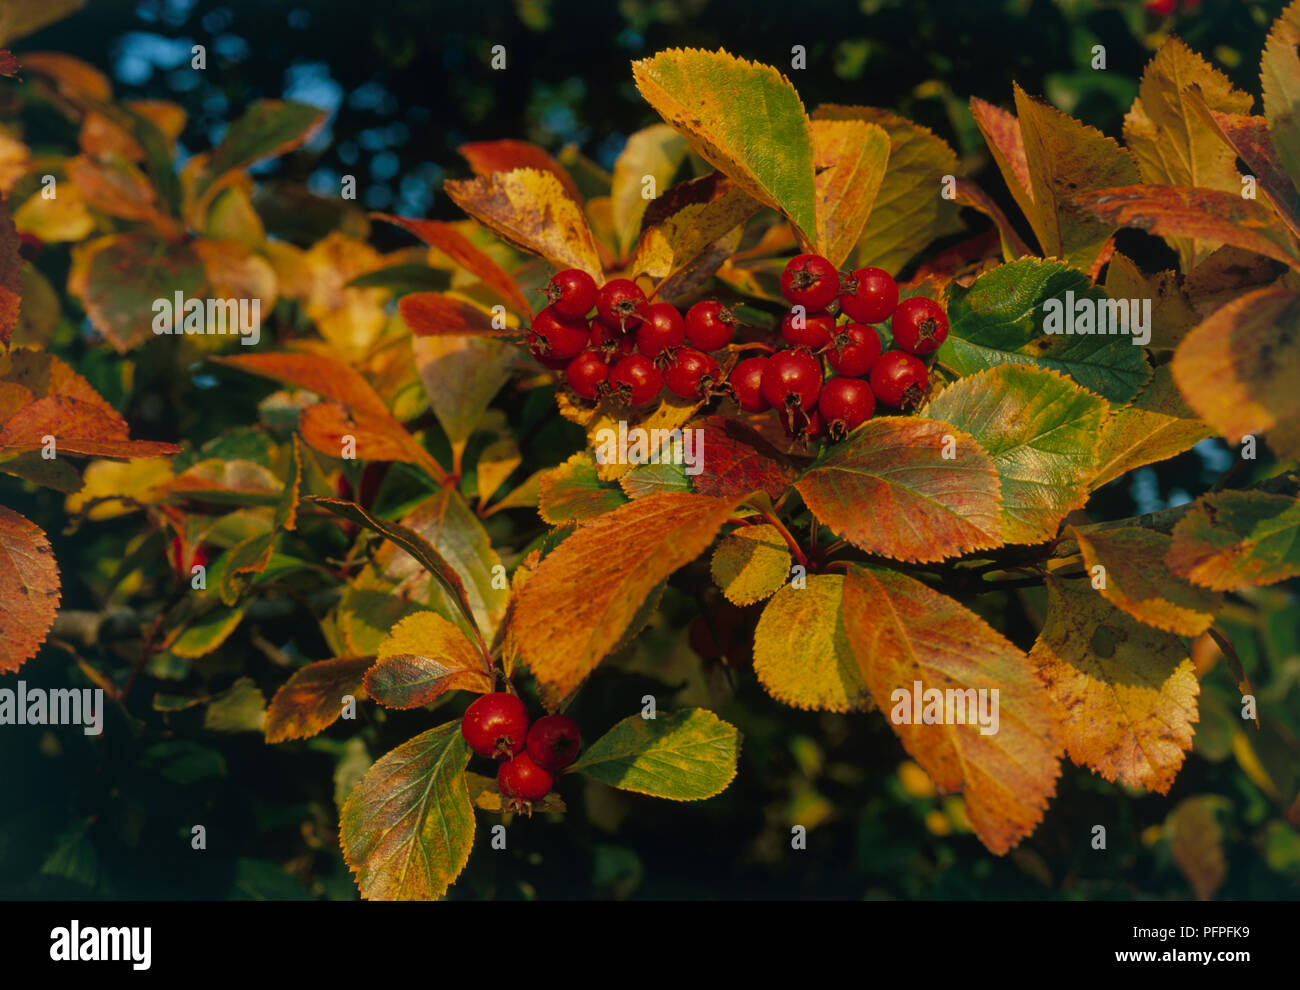 Crataegus persimilis 'Prunifolia' (Broad-leaved Cockspur Thorn), with cluster of red berries and bronze and green autumn leaves, close-up Stock Photo